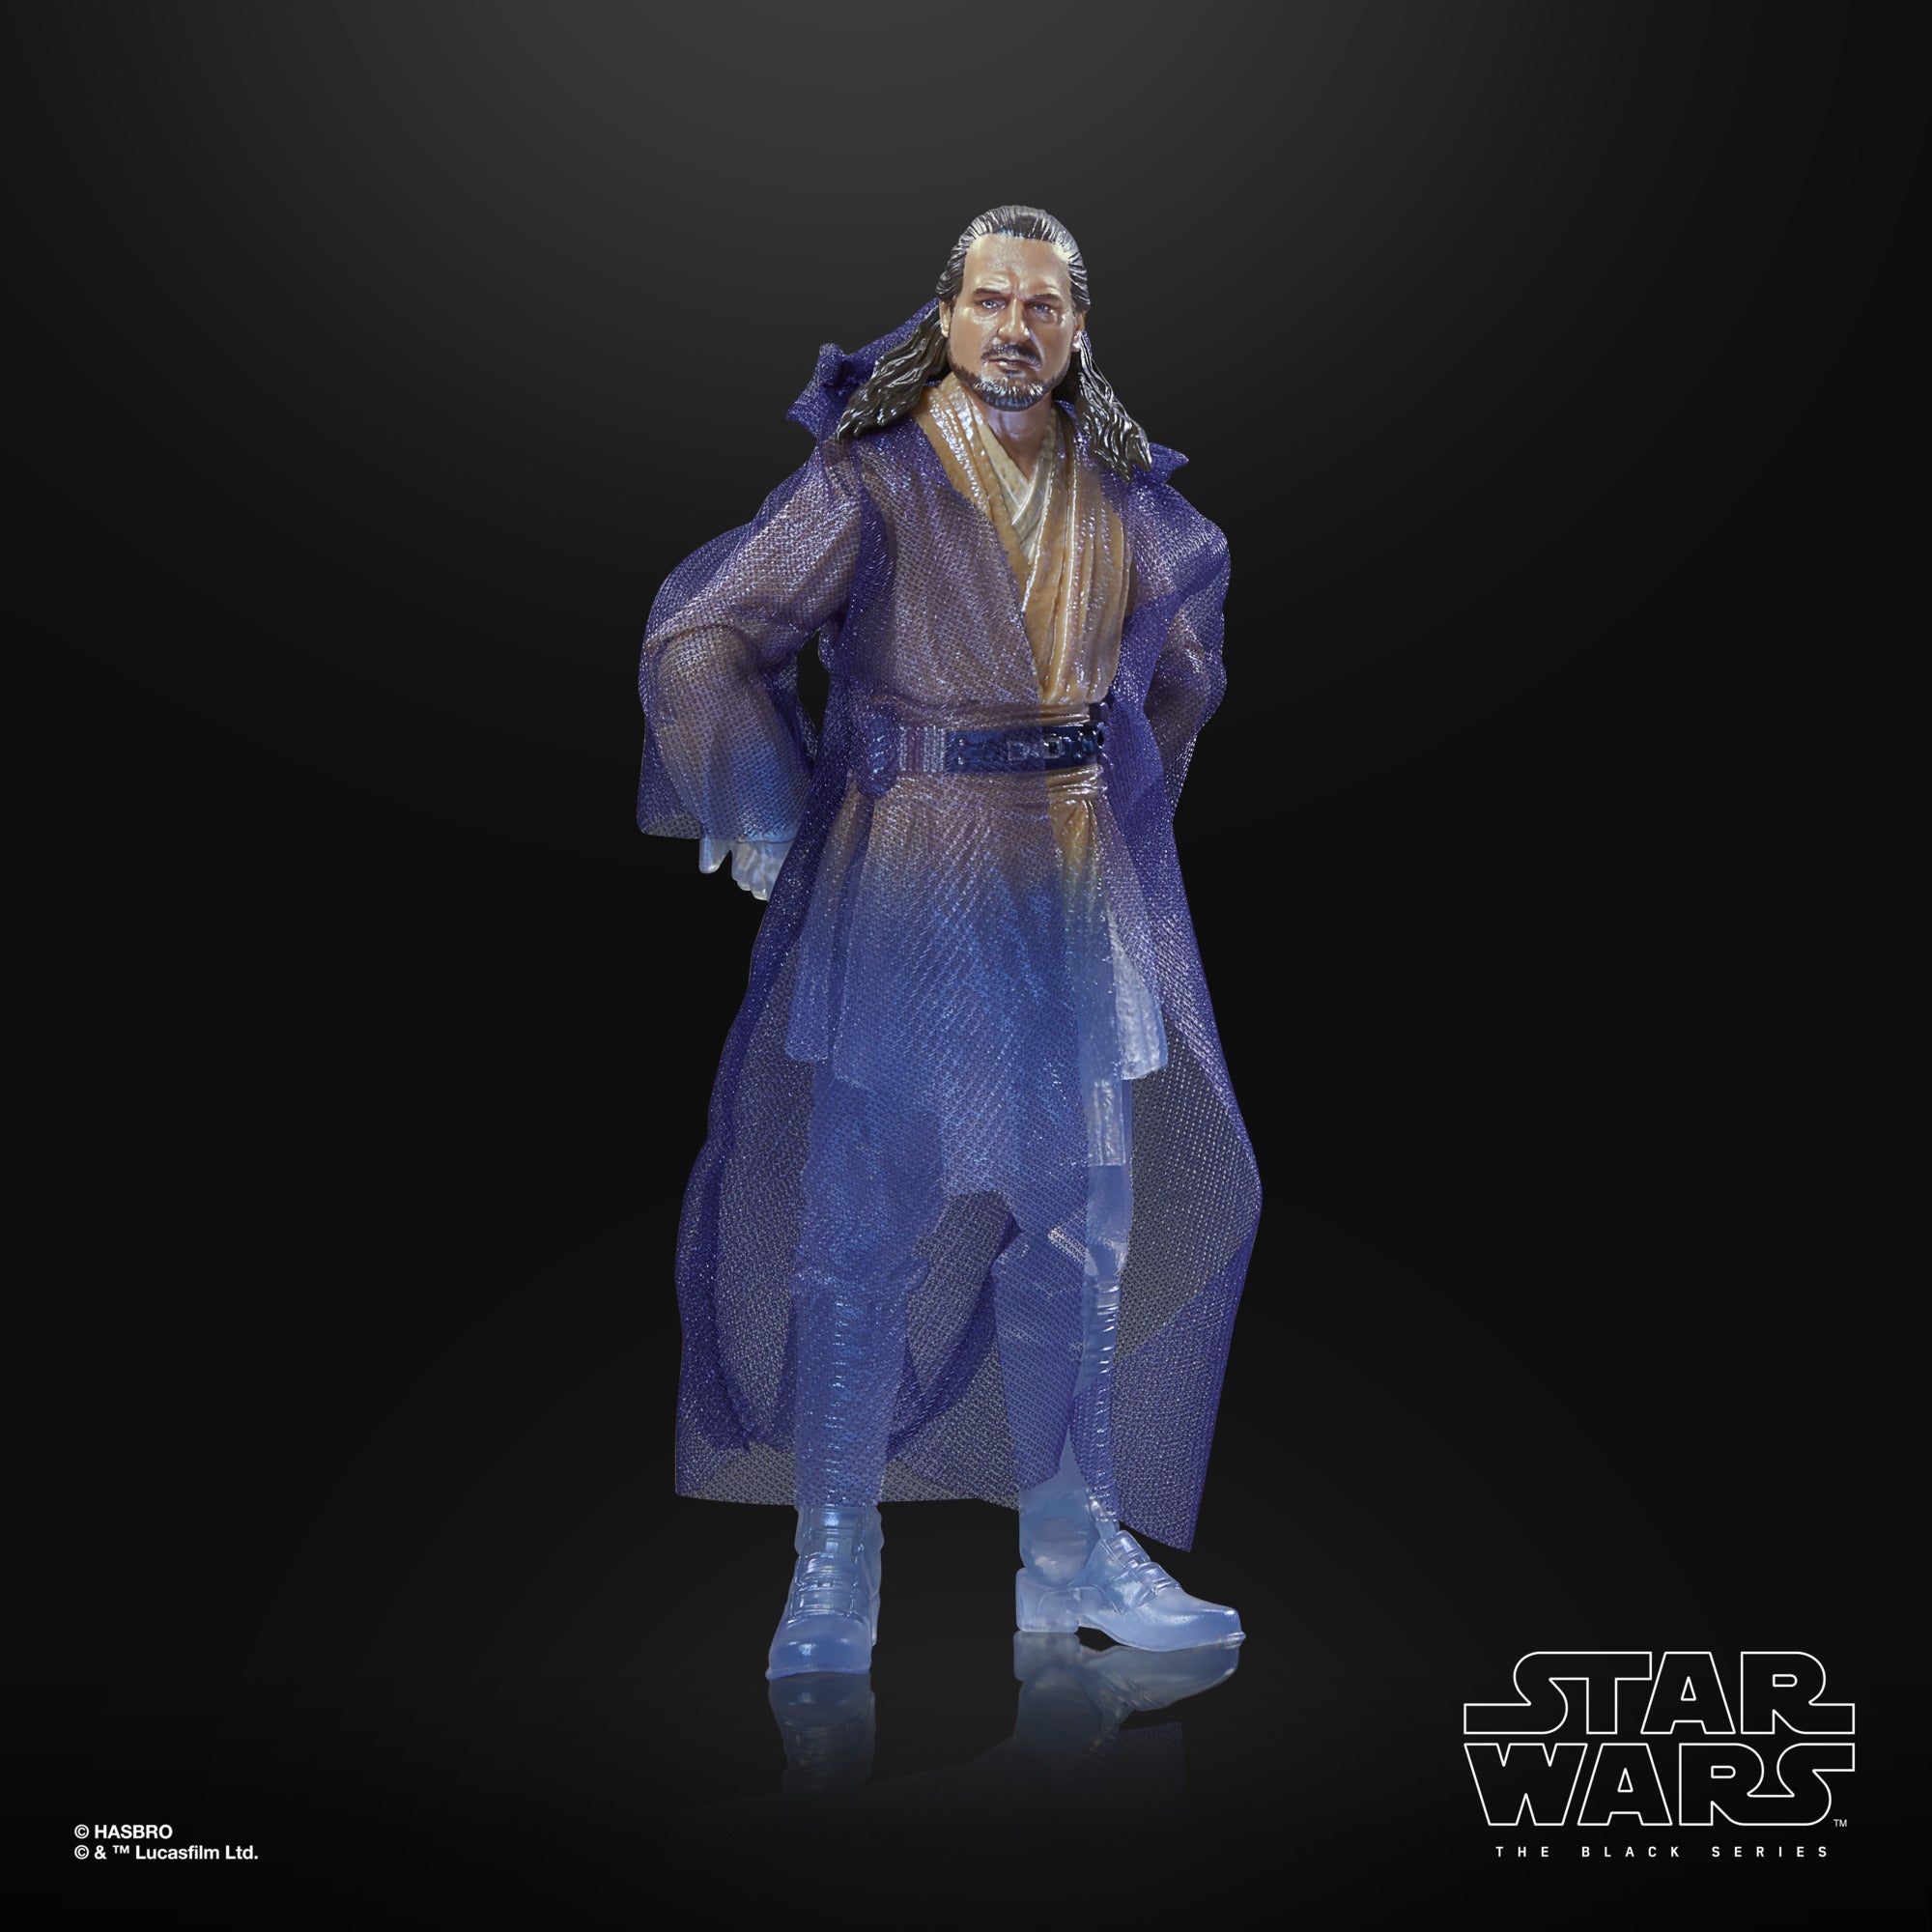 Qui-Gon Jinn Disney+ Series Could Explore Deeper Aspects of the Force